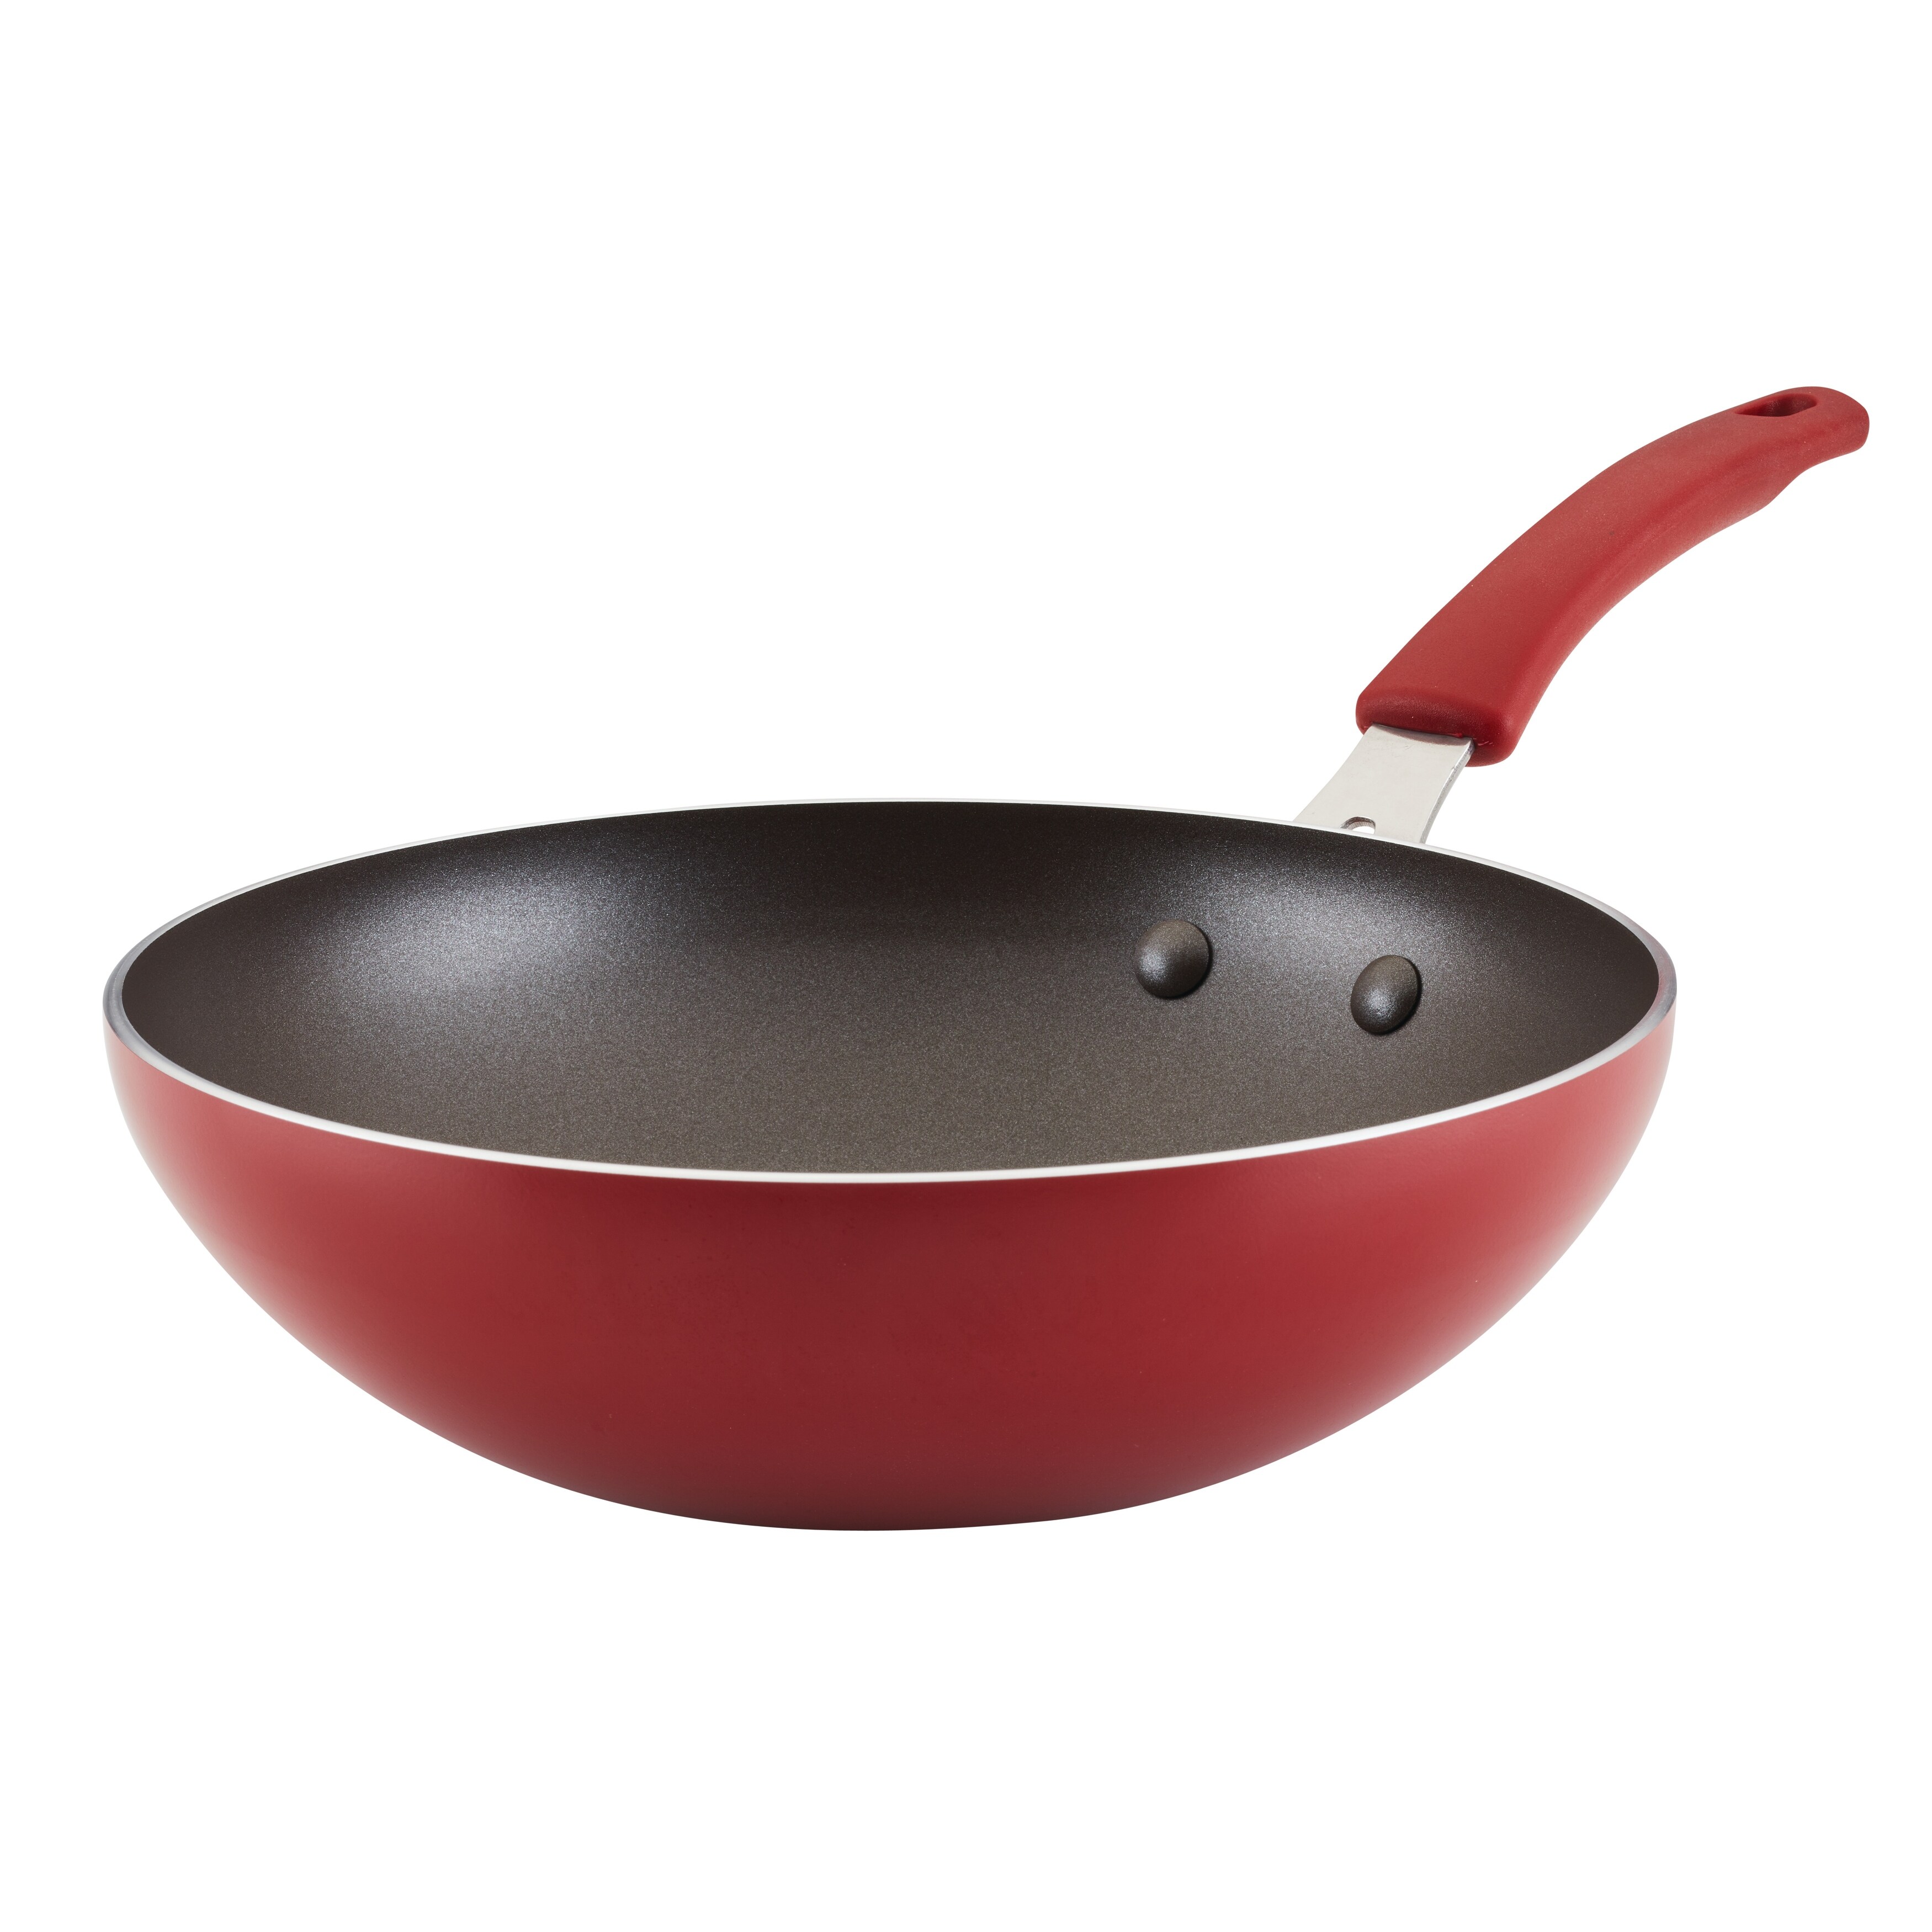 https://ak1.ostkcdn.com/images/products/is/images/direct/1ad6c1a7ee745bb0f45b7383f012d8b322182ccb/Rachael-Ray-Cook-%2B-Create-Aluminum-Nonstick-Stir-Fry-Pan%2C-10.5-Inch%2C-Agave-Blue.jpg